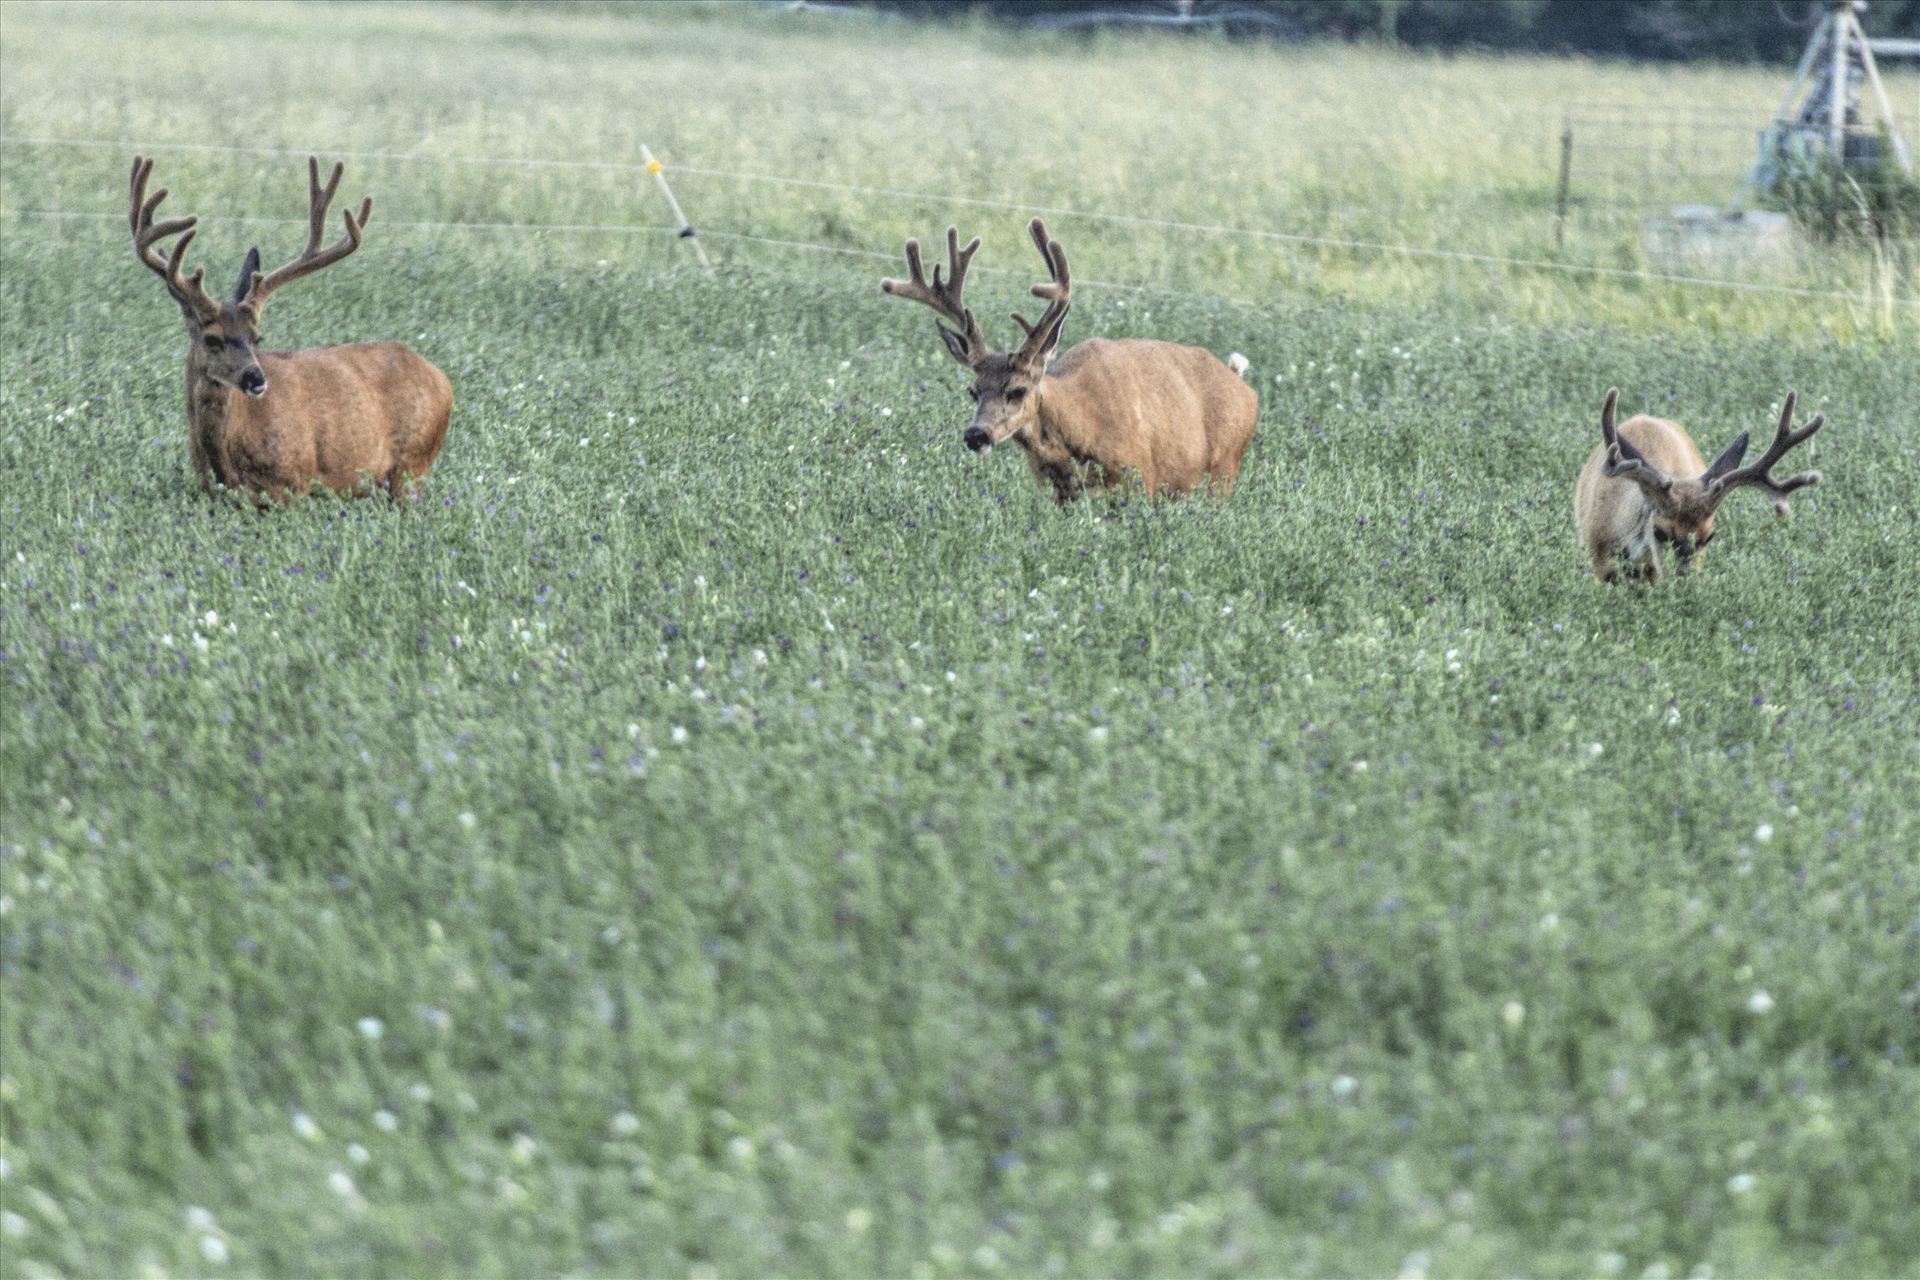 Farm Land BucksEvery chance these bucks get, they are standing in the middle of some of the best alfalfa in the world, feeding and growing.